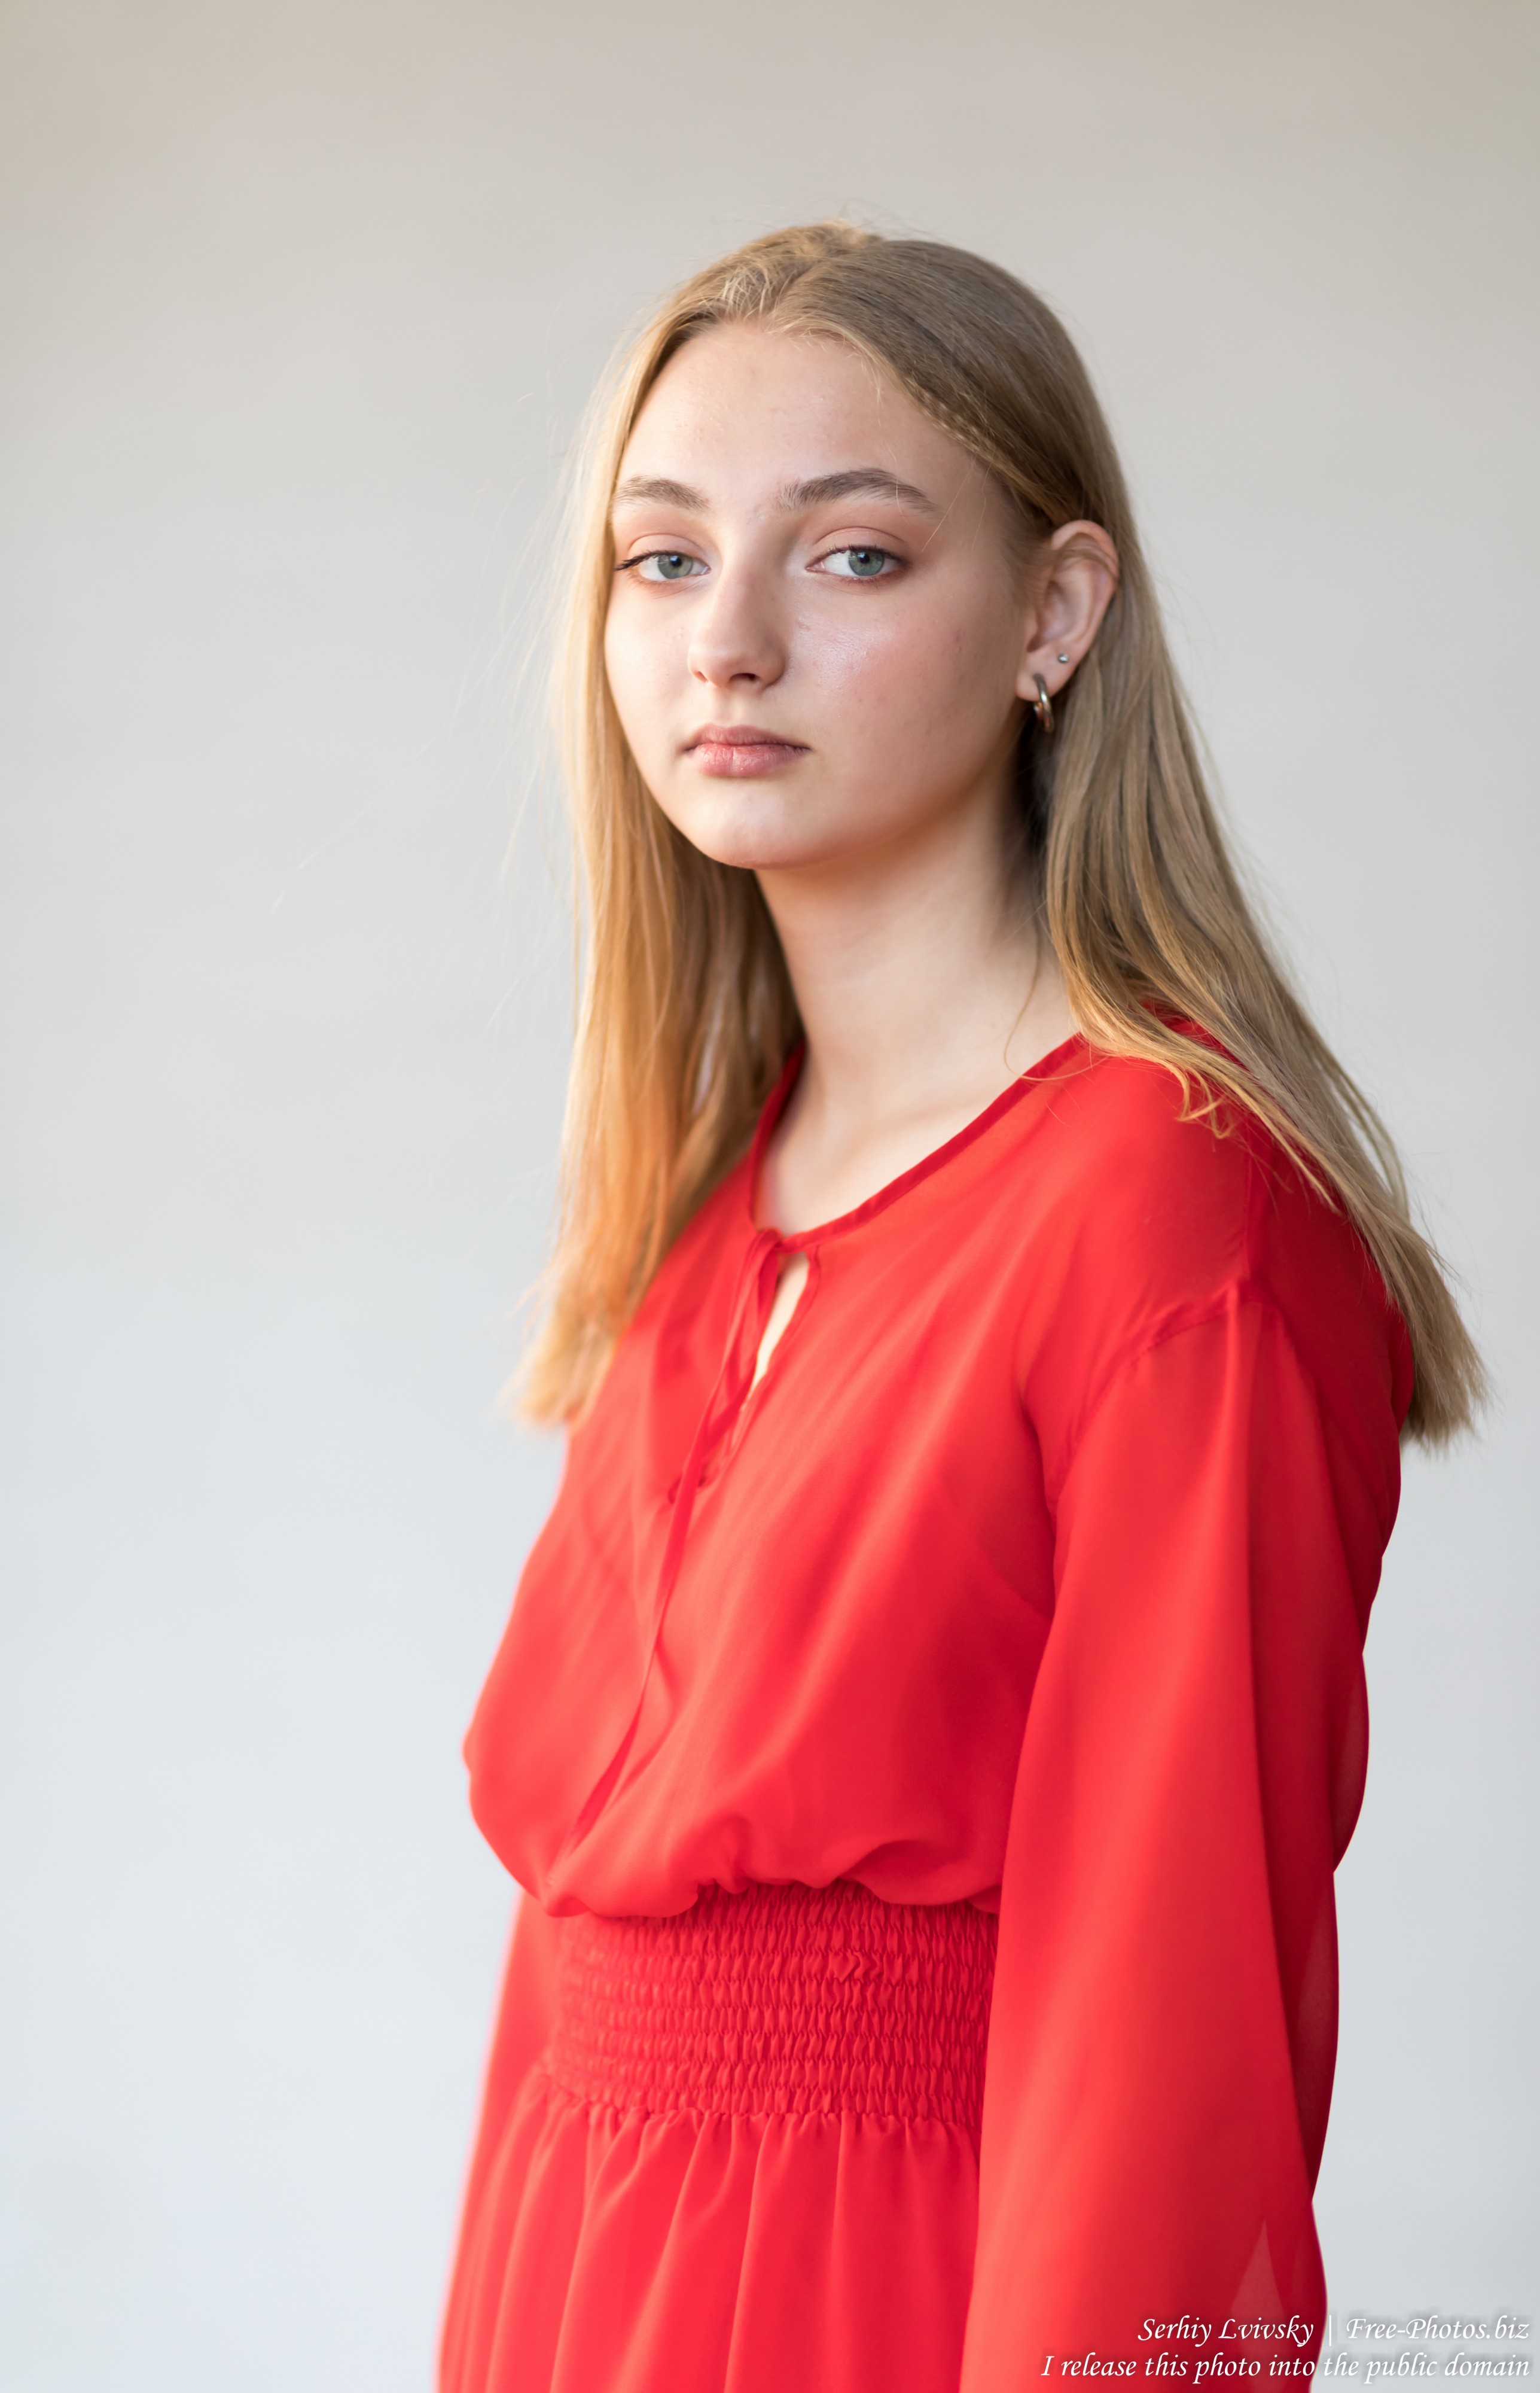 Nastia - a 16-year-old natural blonde girl photographed in September 2019 by Serhiy Lvivsky, picture 2